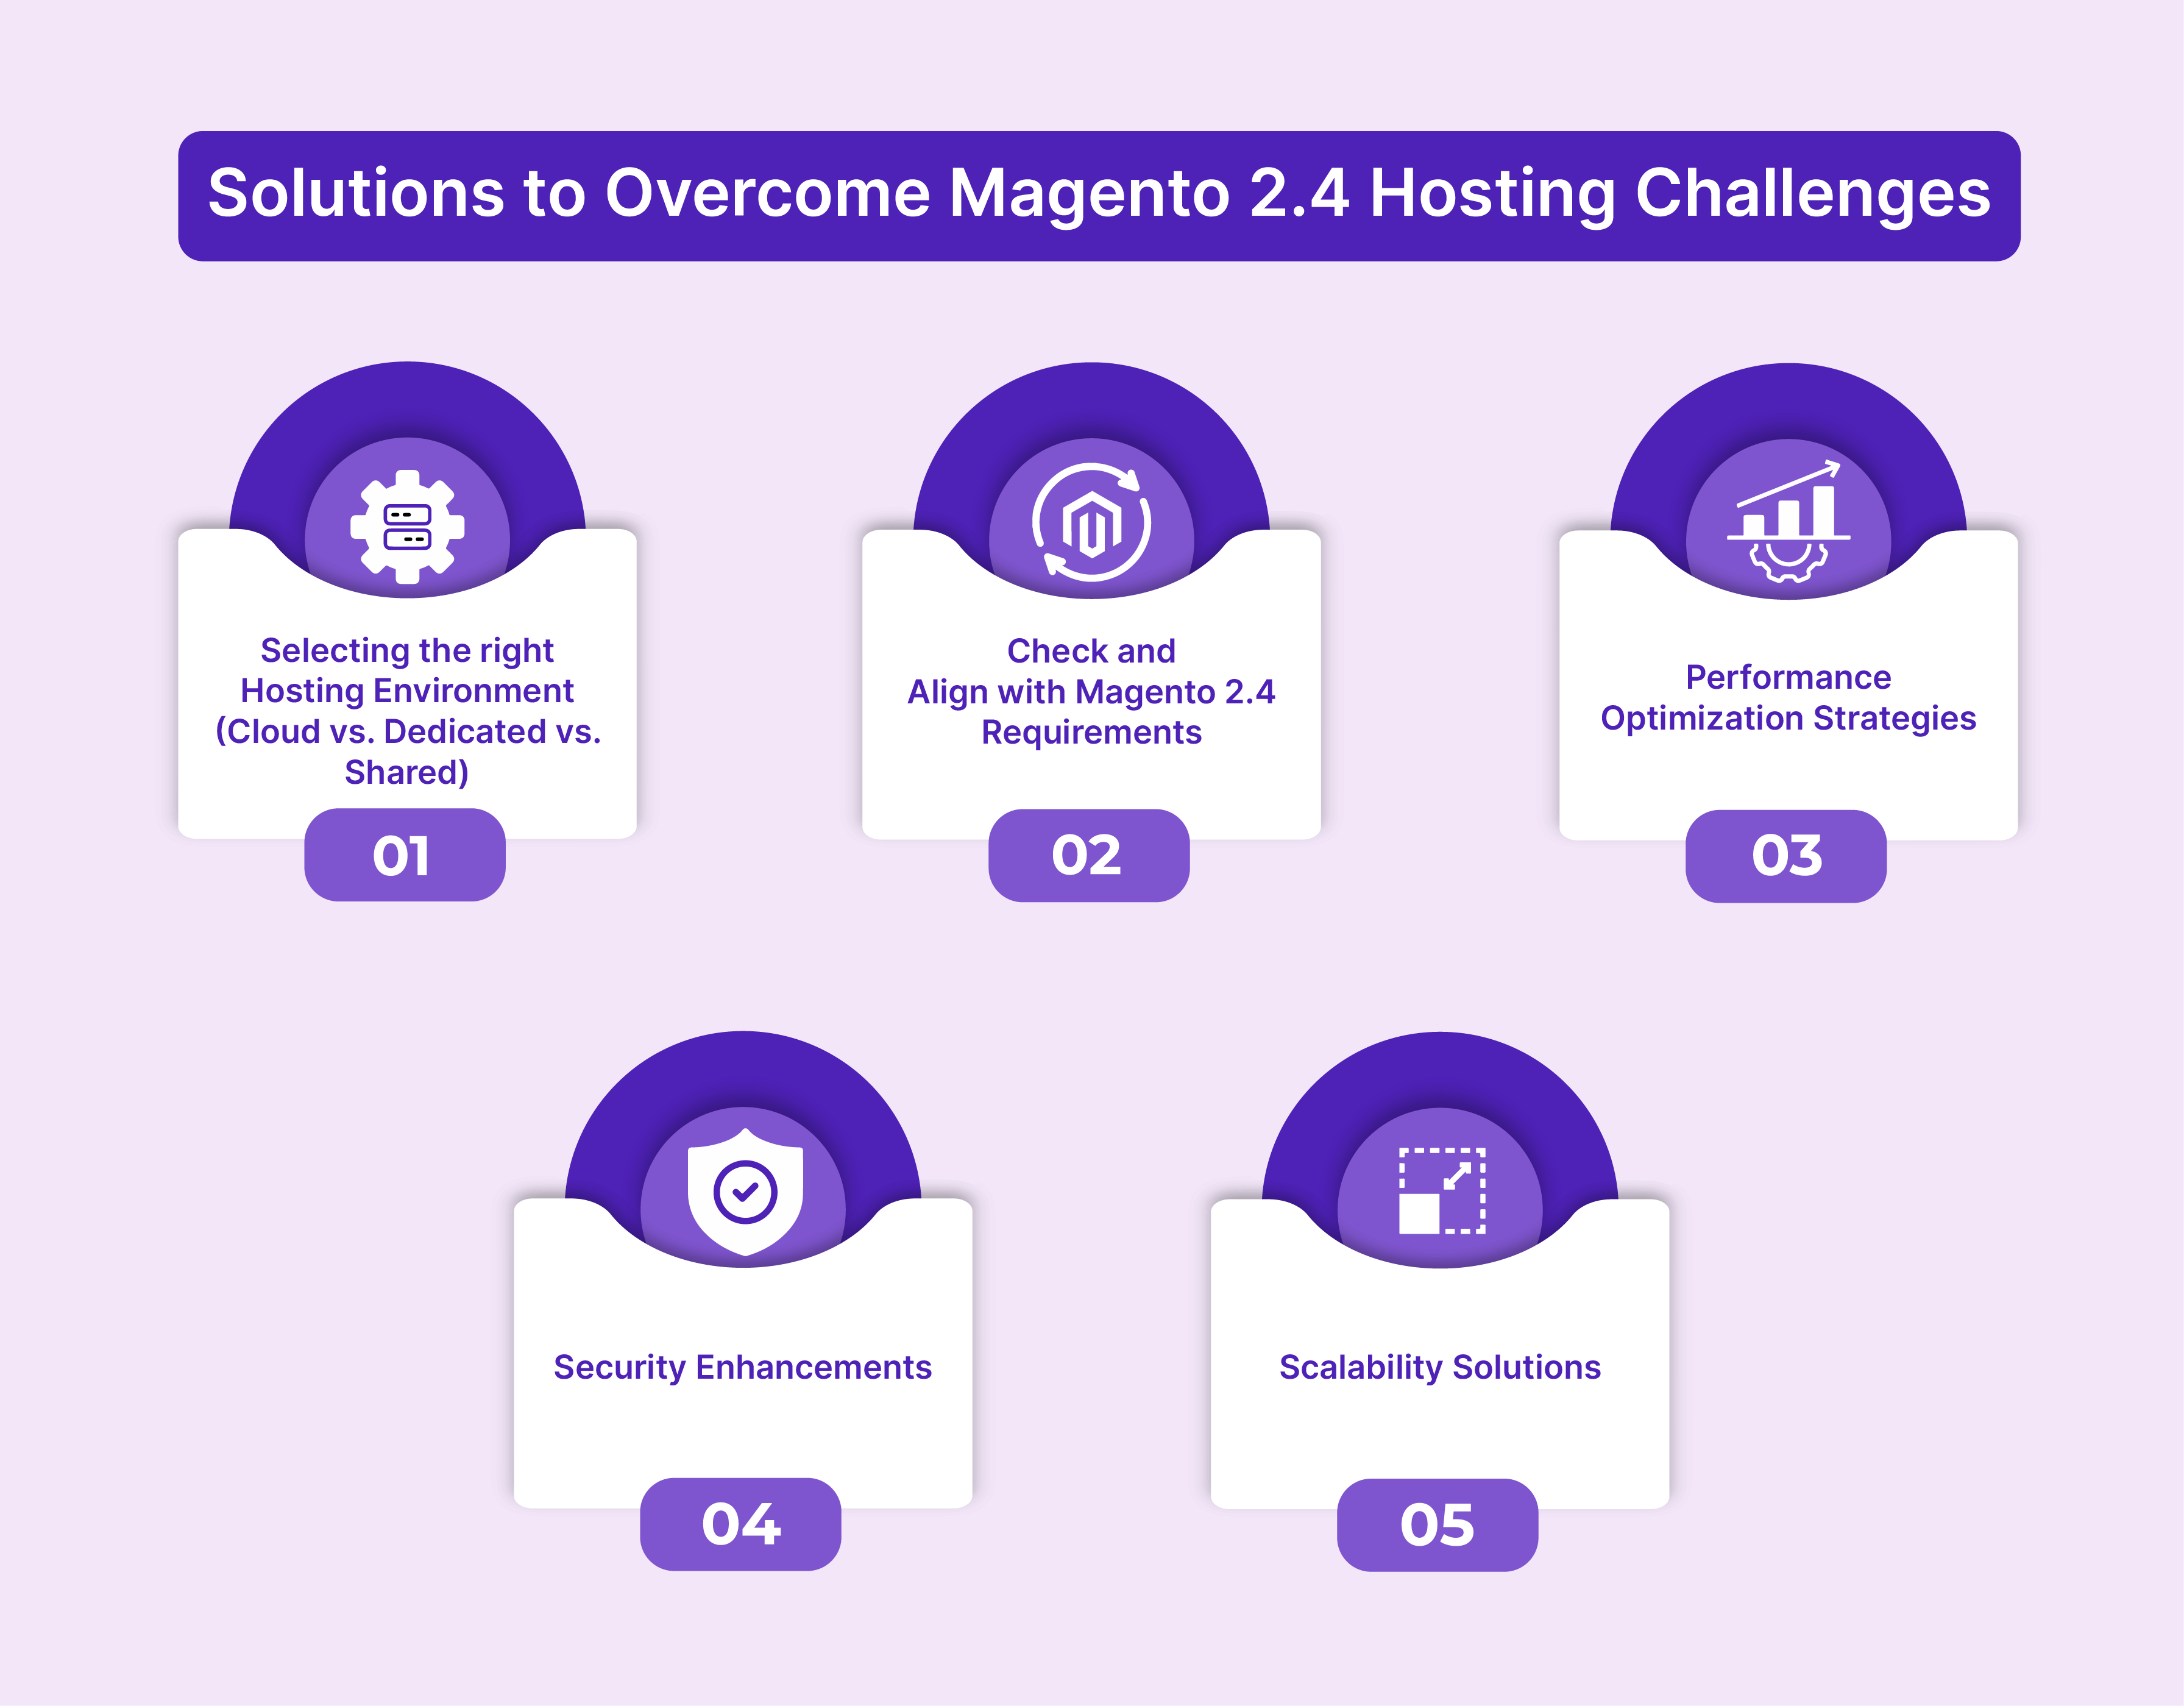 Solutions of Magento 2.4 Hosting Challenges